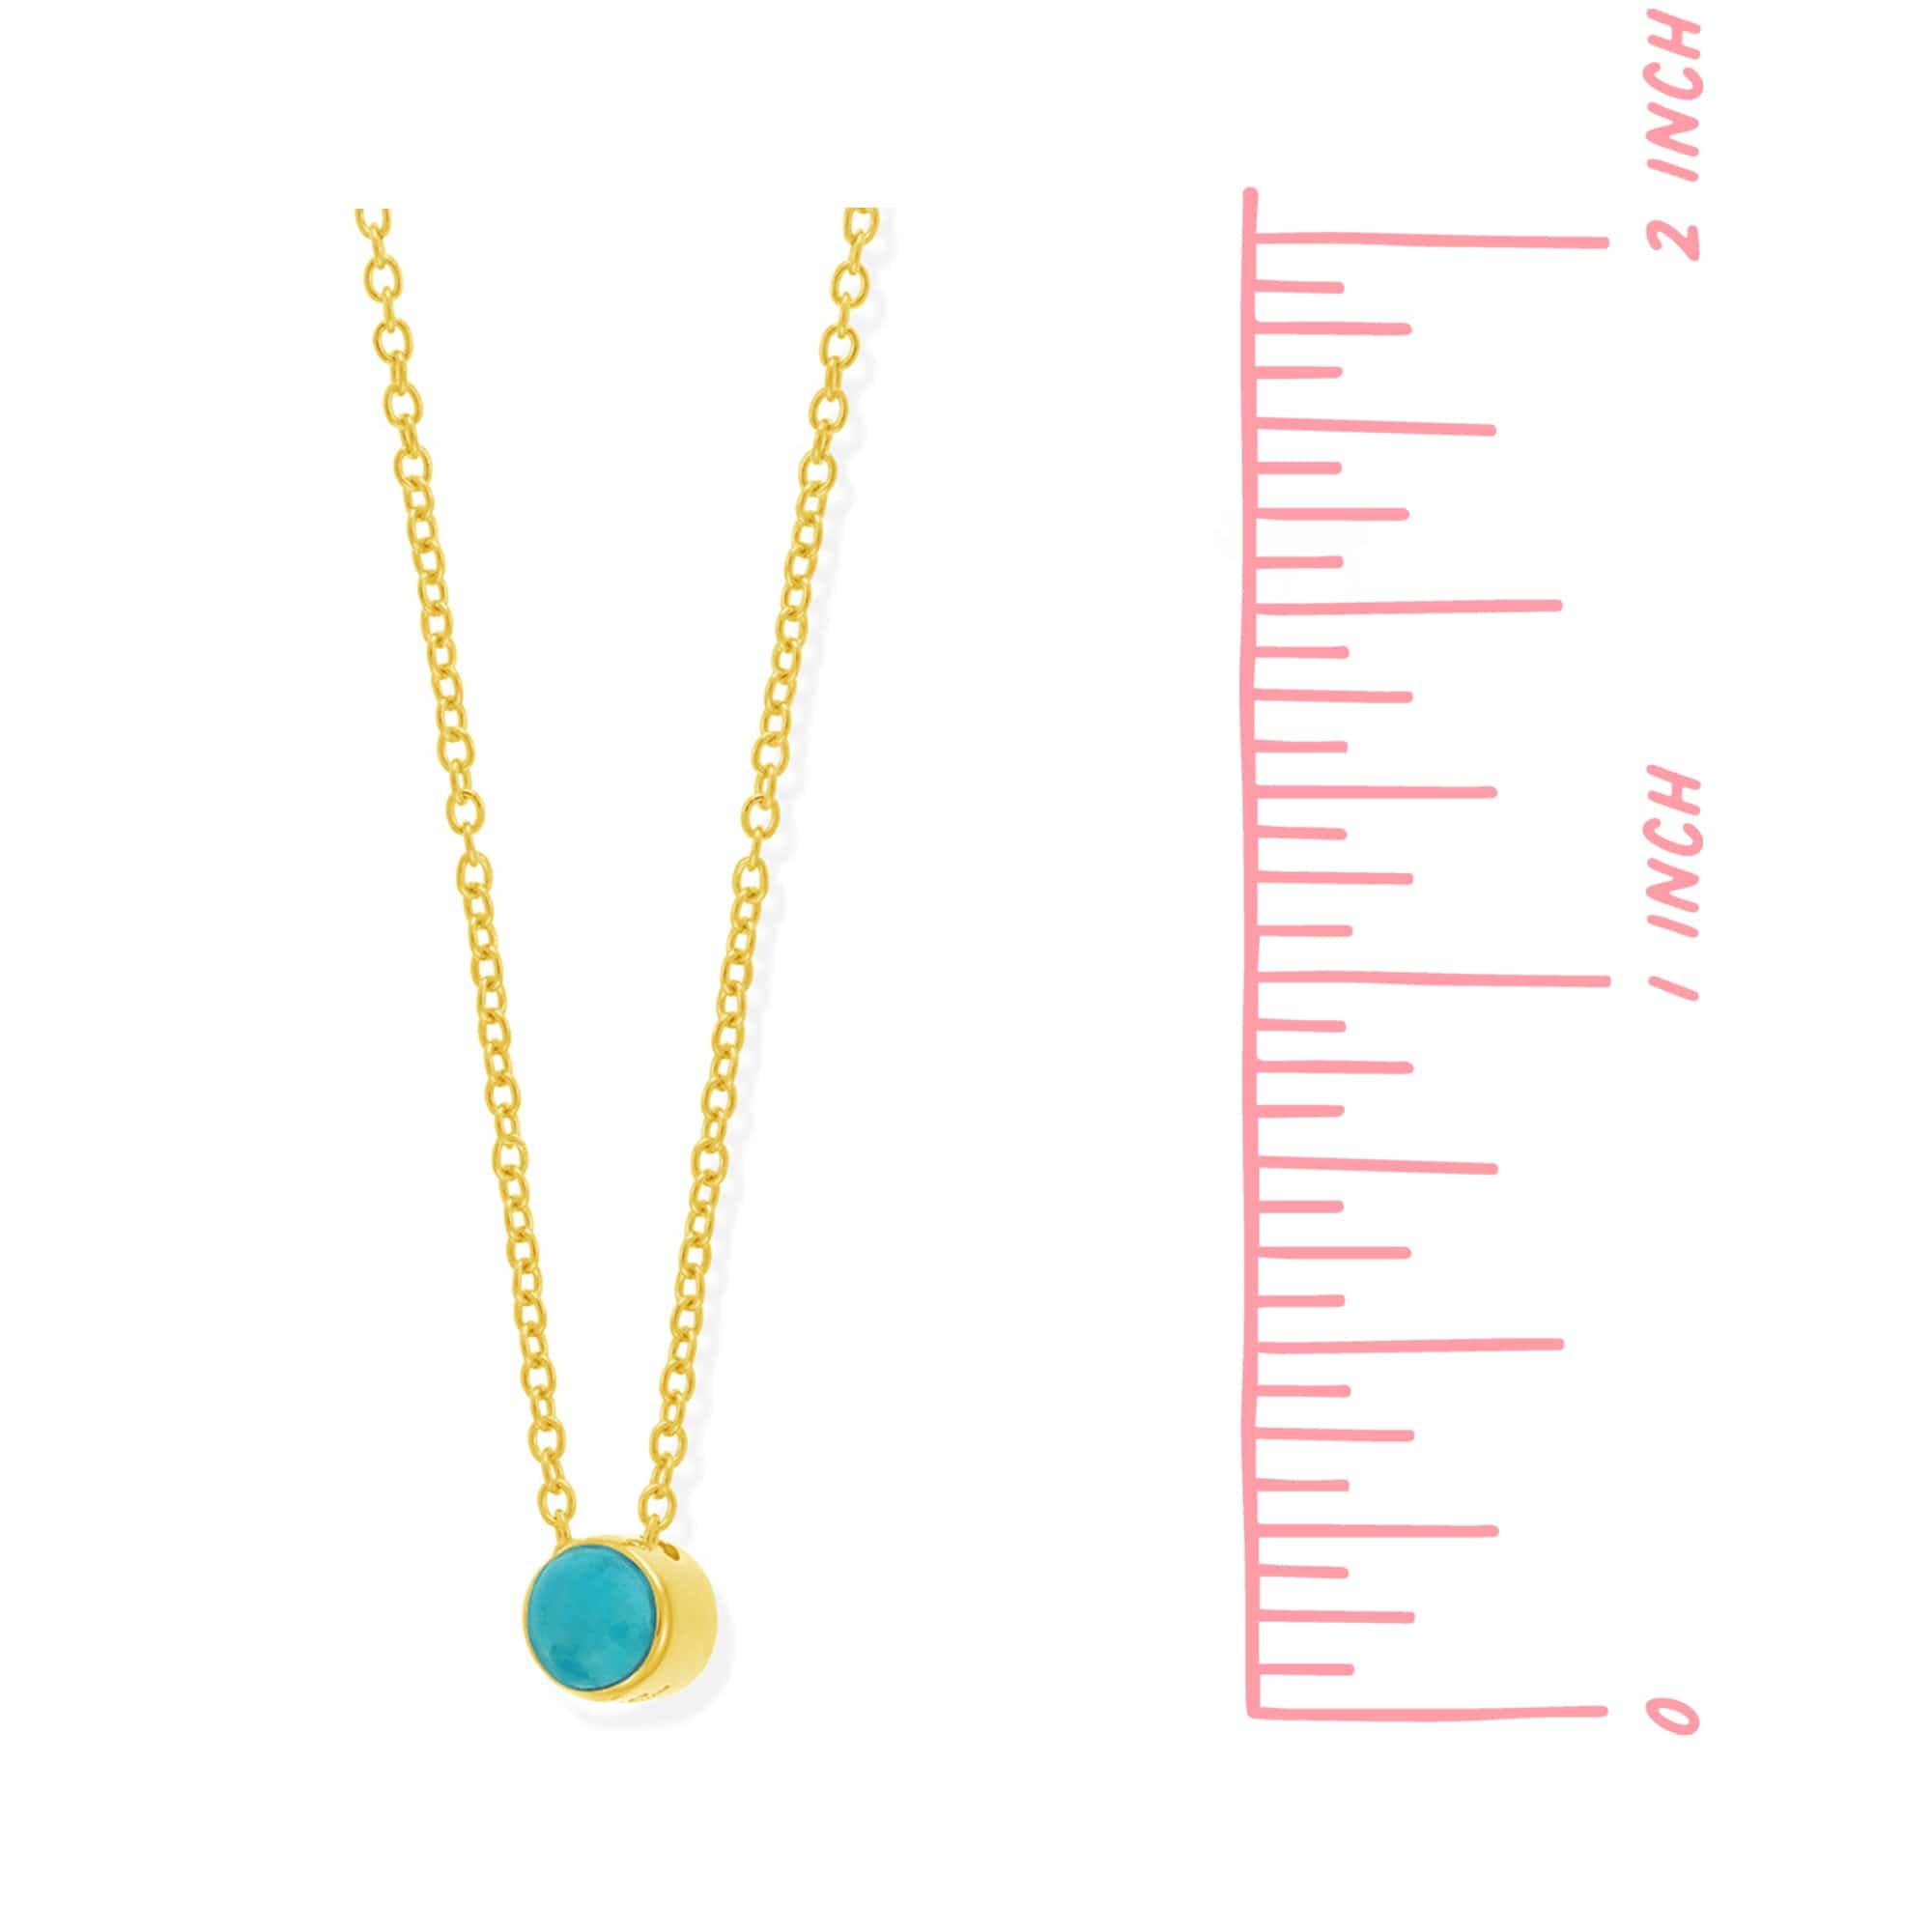 Boma Jewelry Necklaces Belle Dot Pendant Necklace Gold